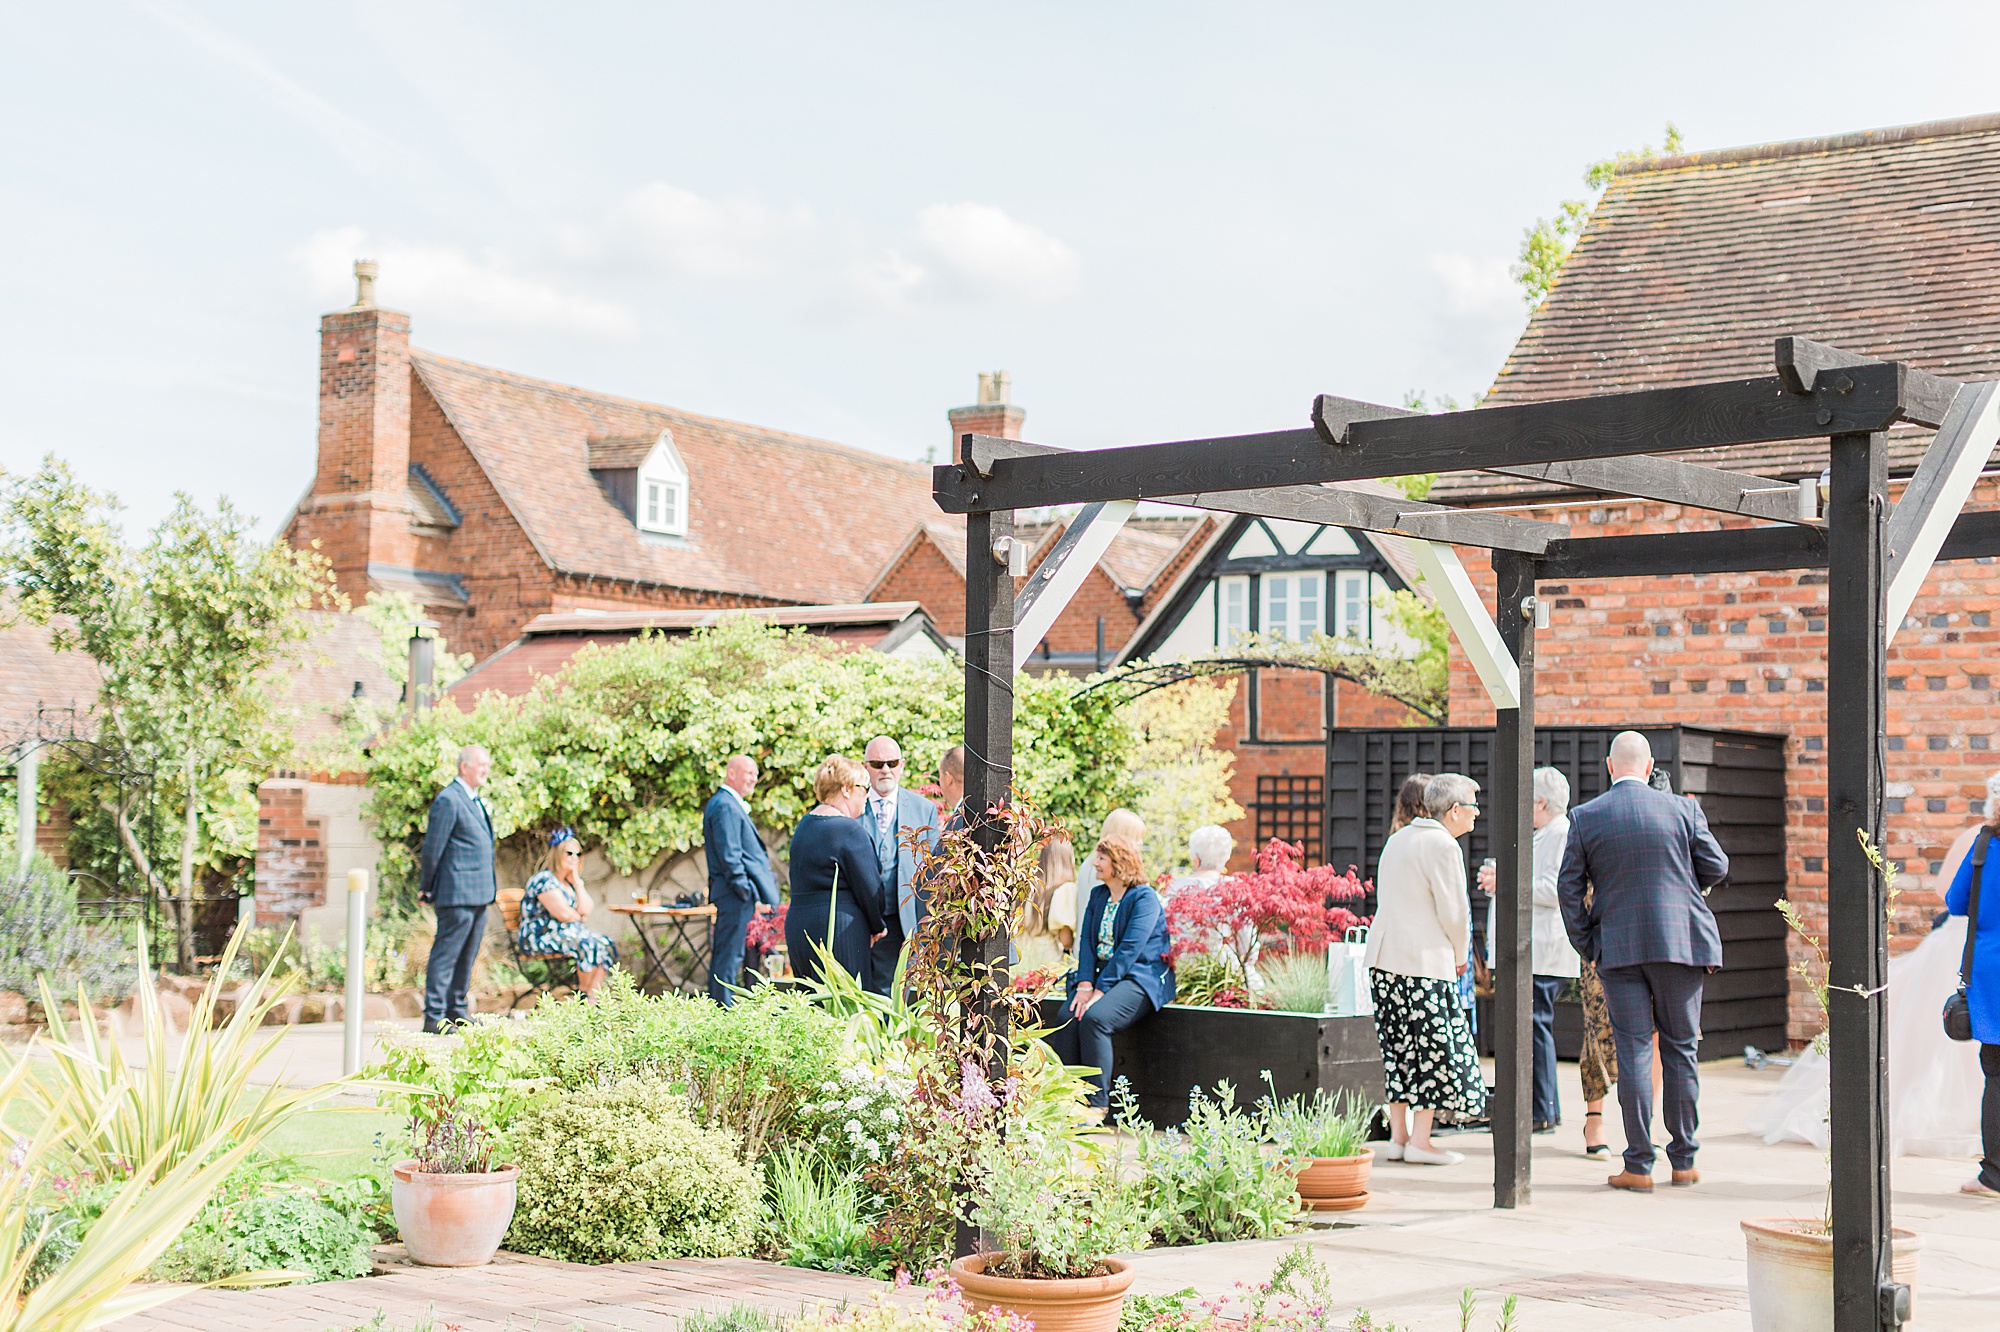 photo of a wedding reception at curradine barns. Guests are at the front gardens with the barns behind them enjoying drinks outside at a spring wedding